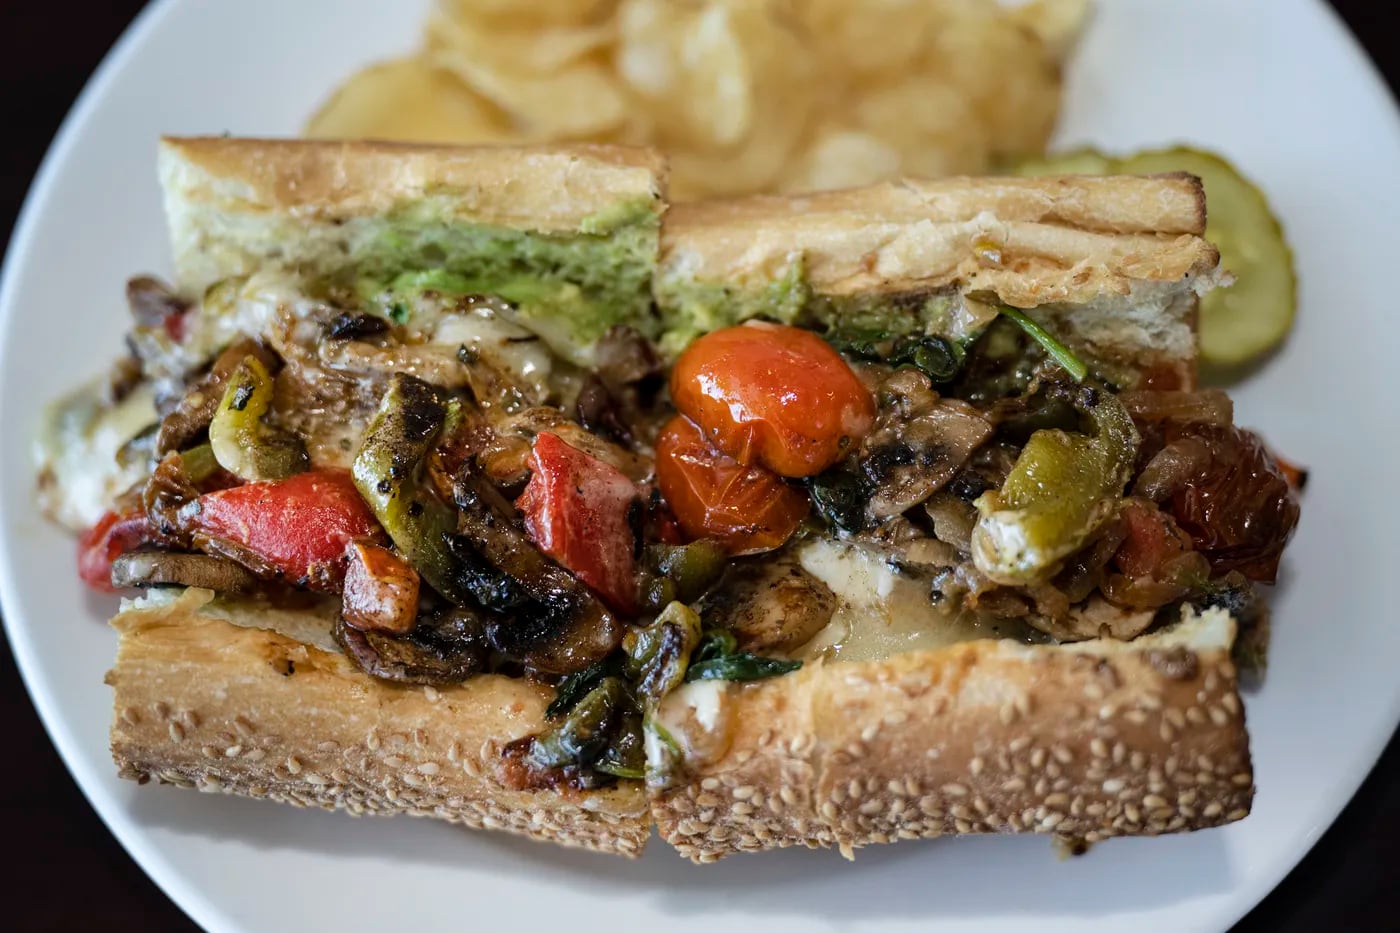 The Vex’ahlia is a pile-it-on vegetarian fantasia of roasted peppers, onions, mixed mushrooms, and marinated tomatoes at Queen Bean Bistro.